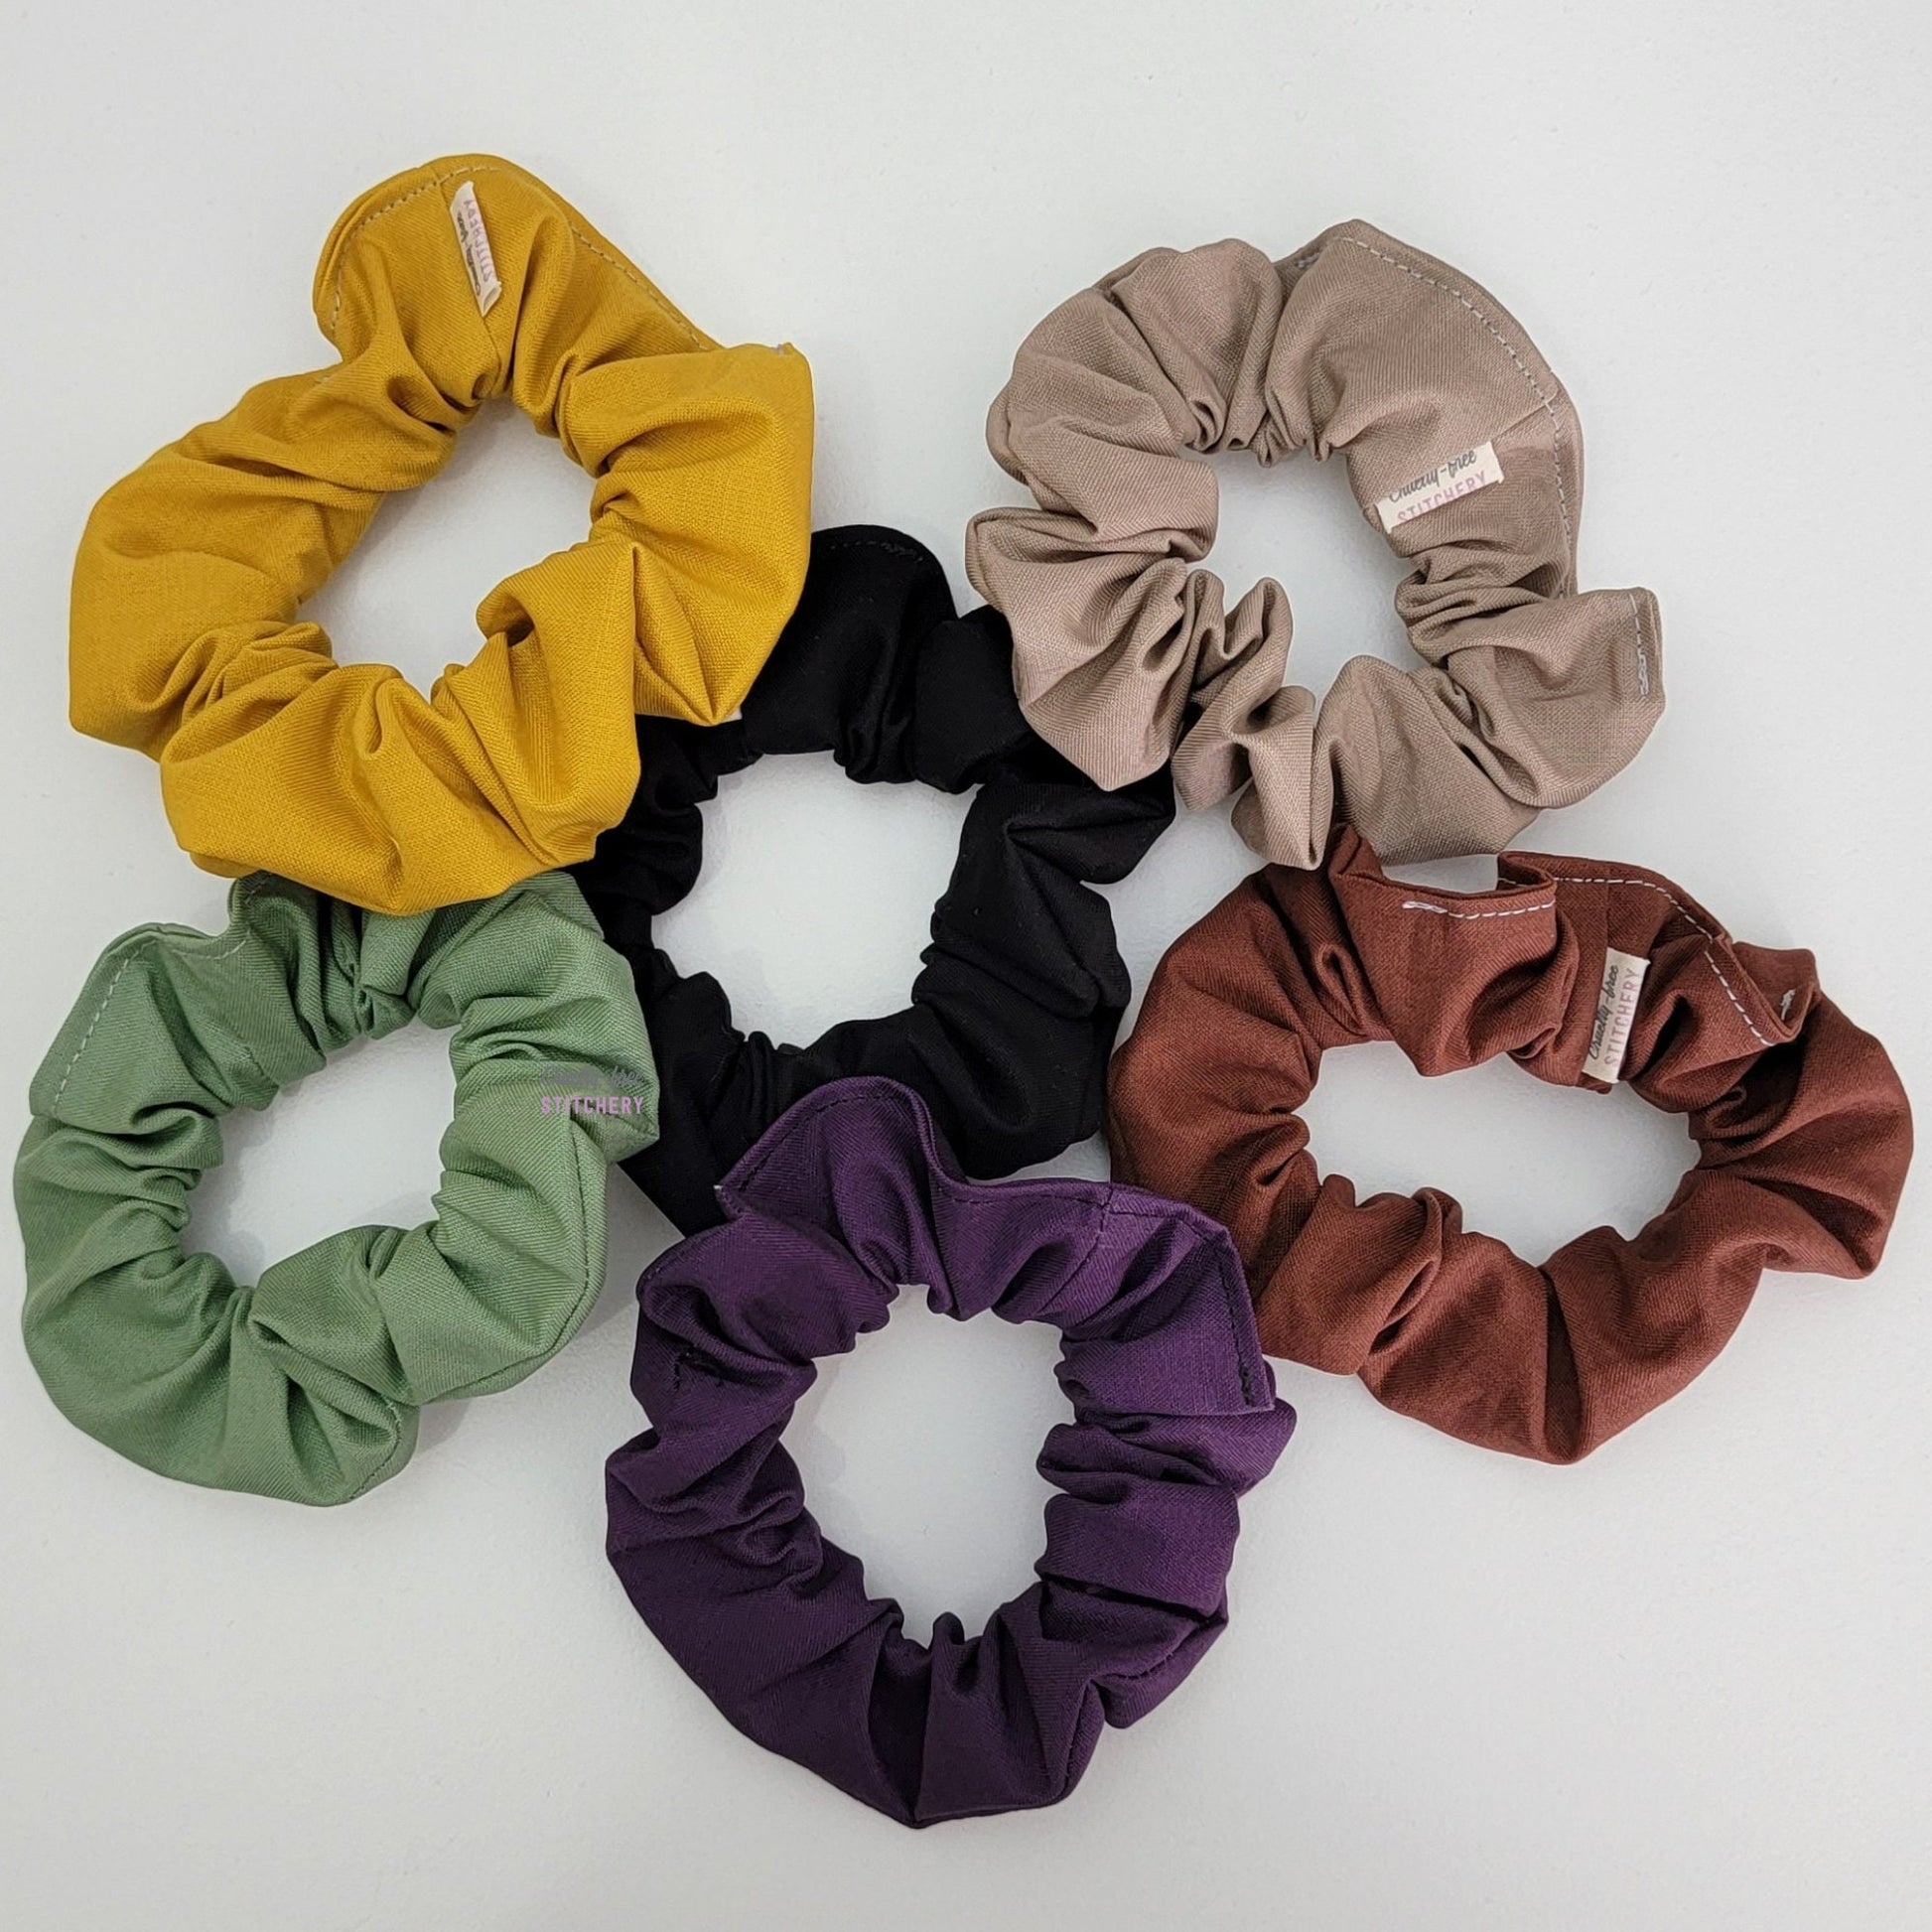 Six solid color scrunchies laid on a white background.